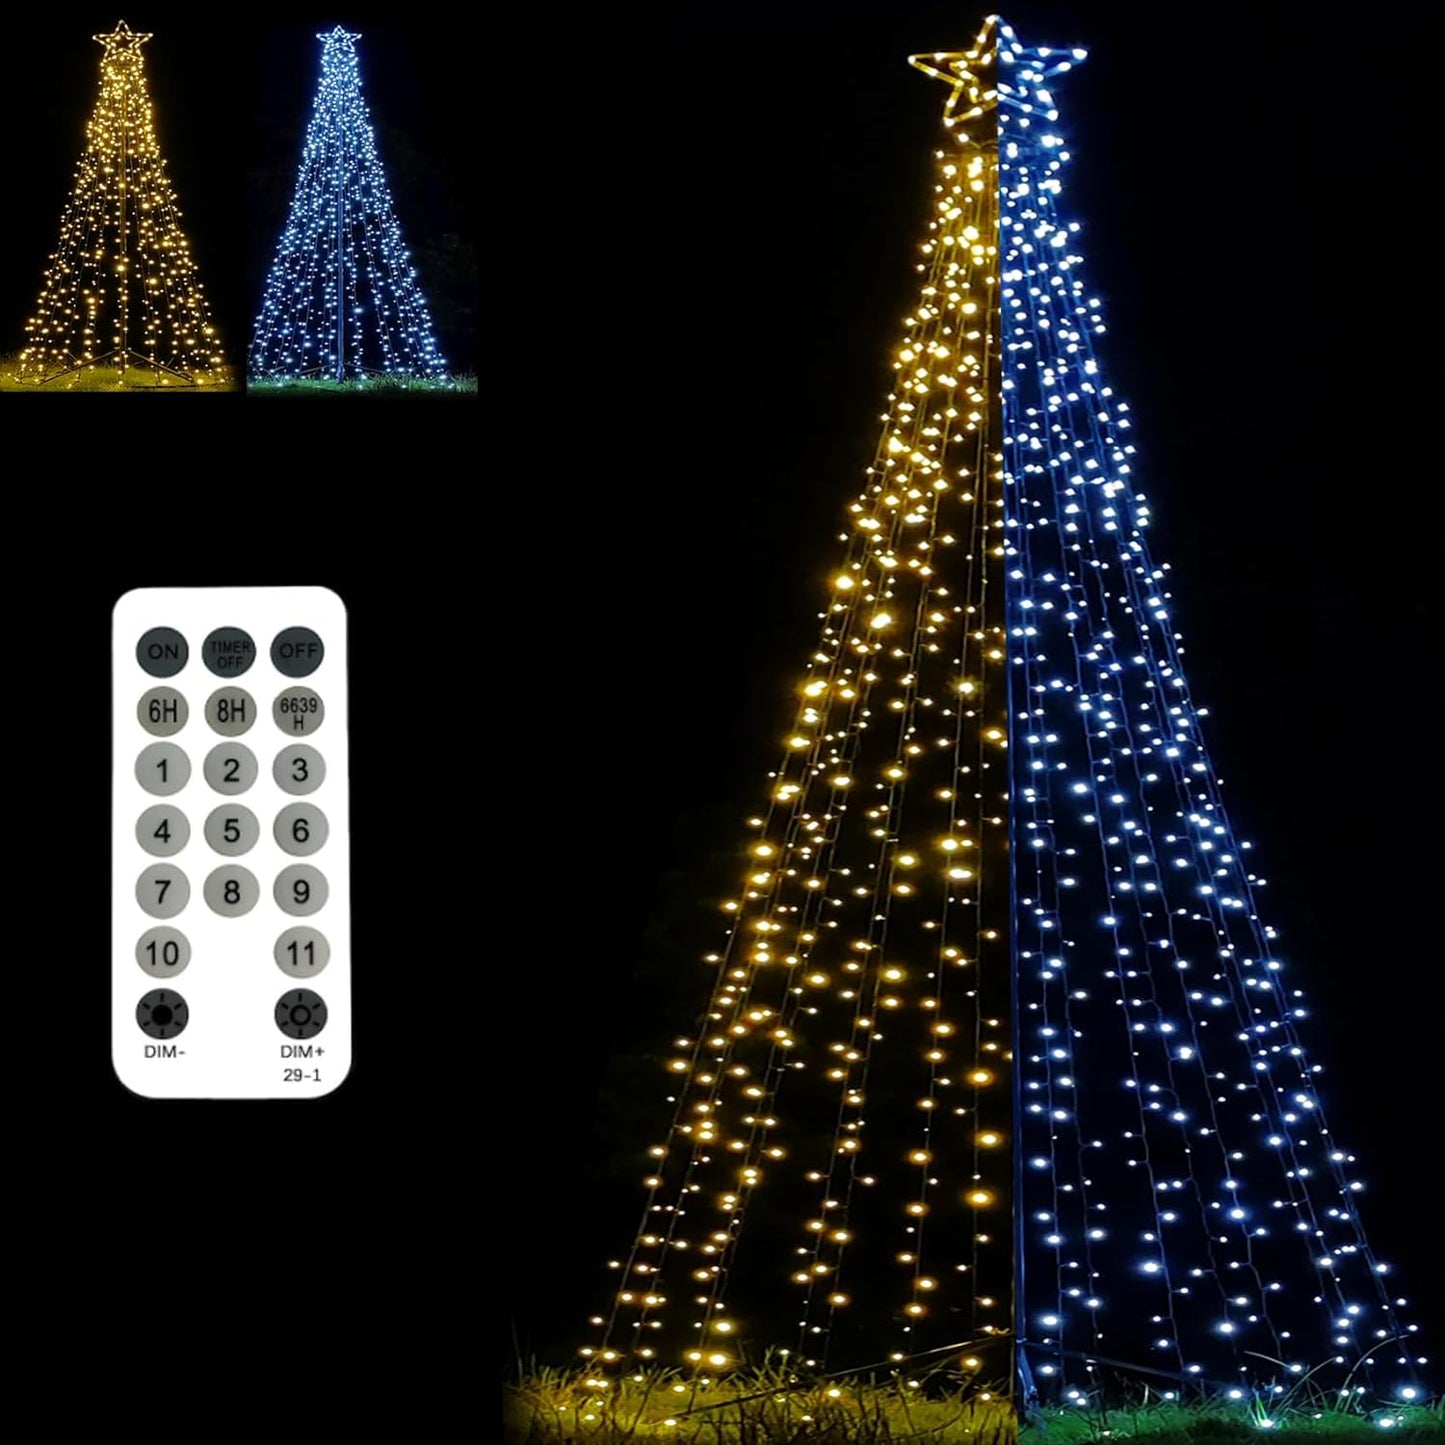 Outdoor Lighting Christmas Tree Lights Cone Tall Star Topped Artificial Christmas Trees Arbol de Navidad Outside Decor for Xmas New Year Holiday 7.8Ft WarmWhite/White